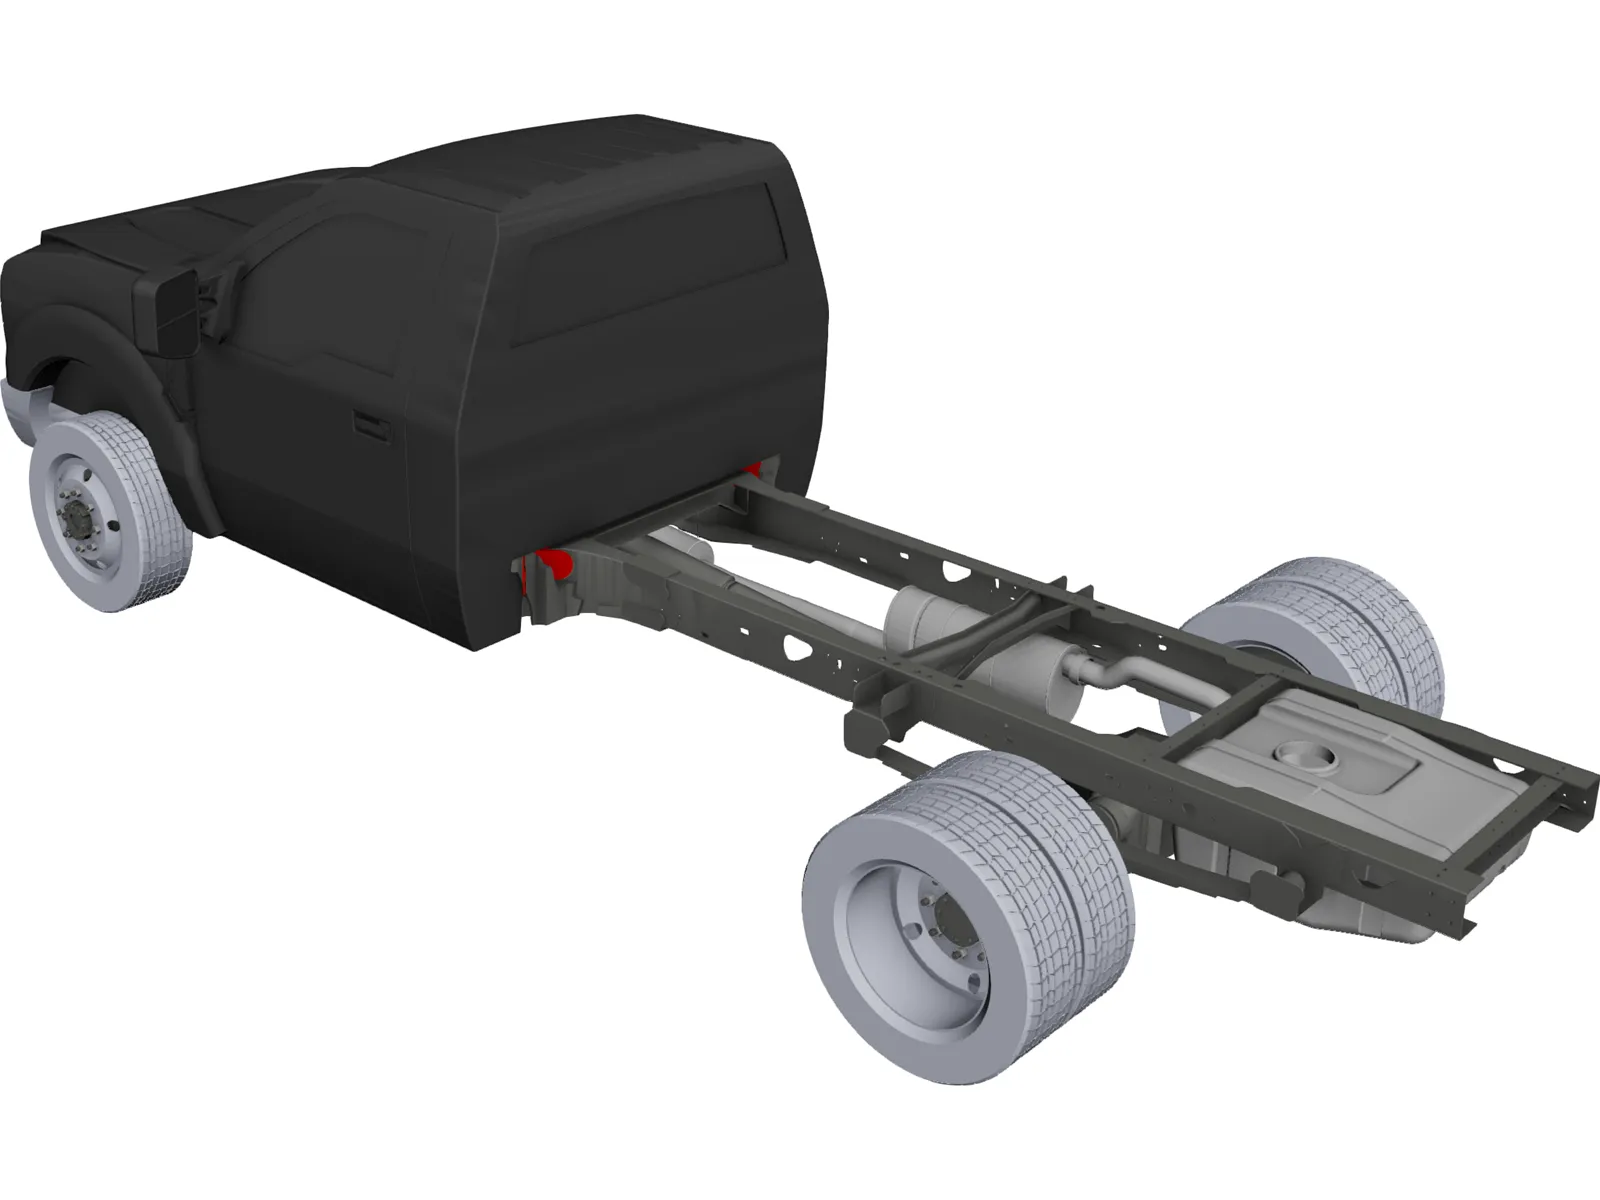 Ford F-550 Chassis 3D Model